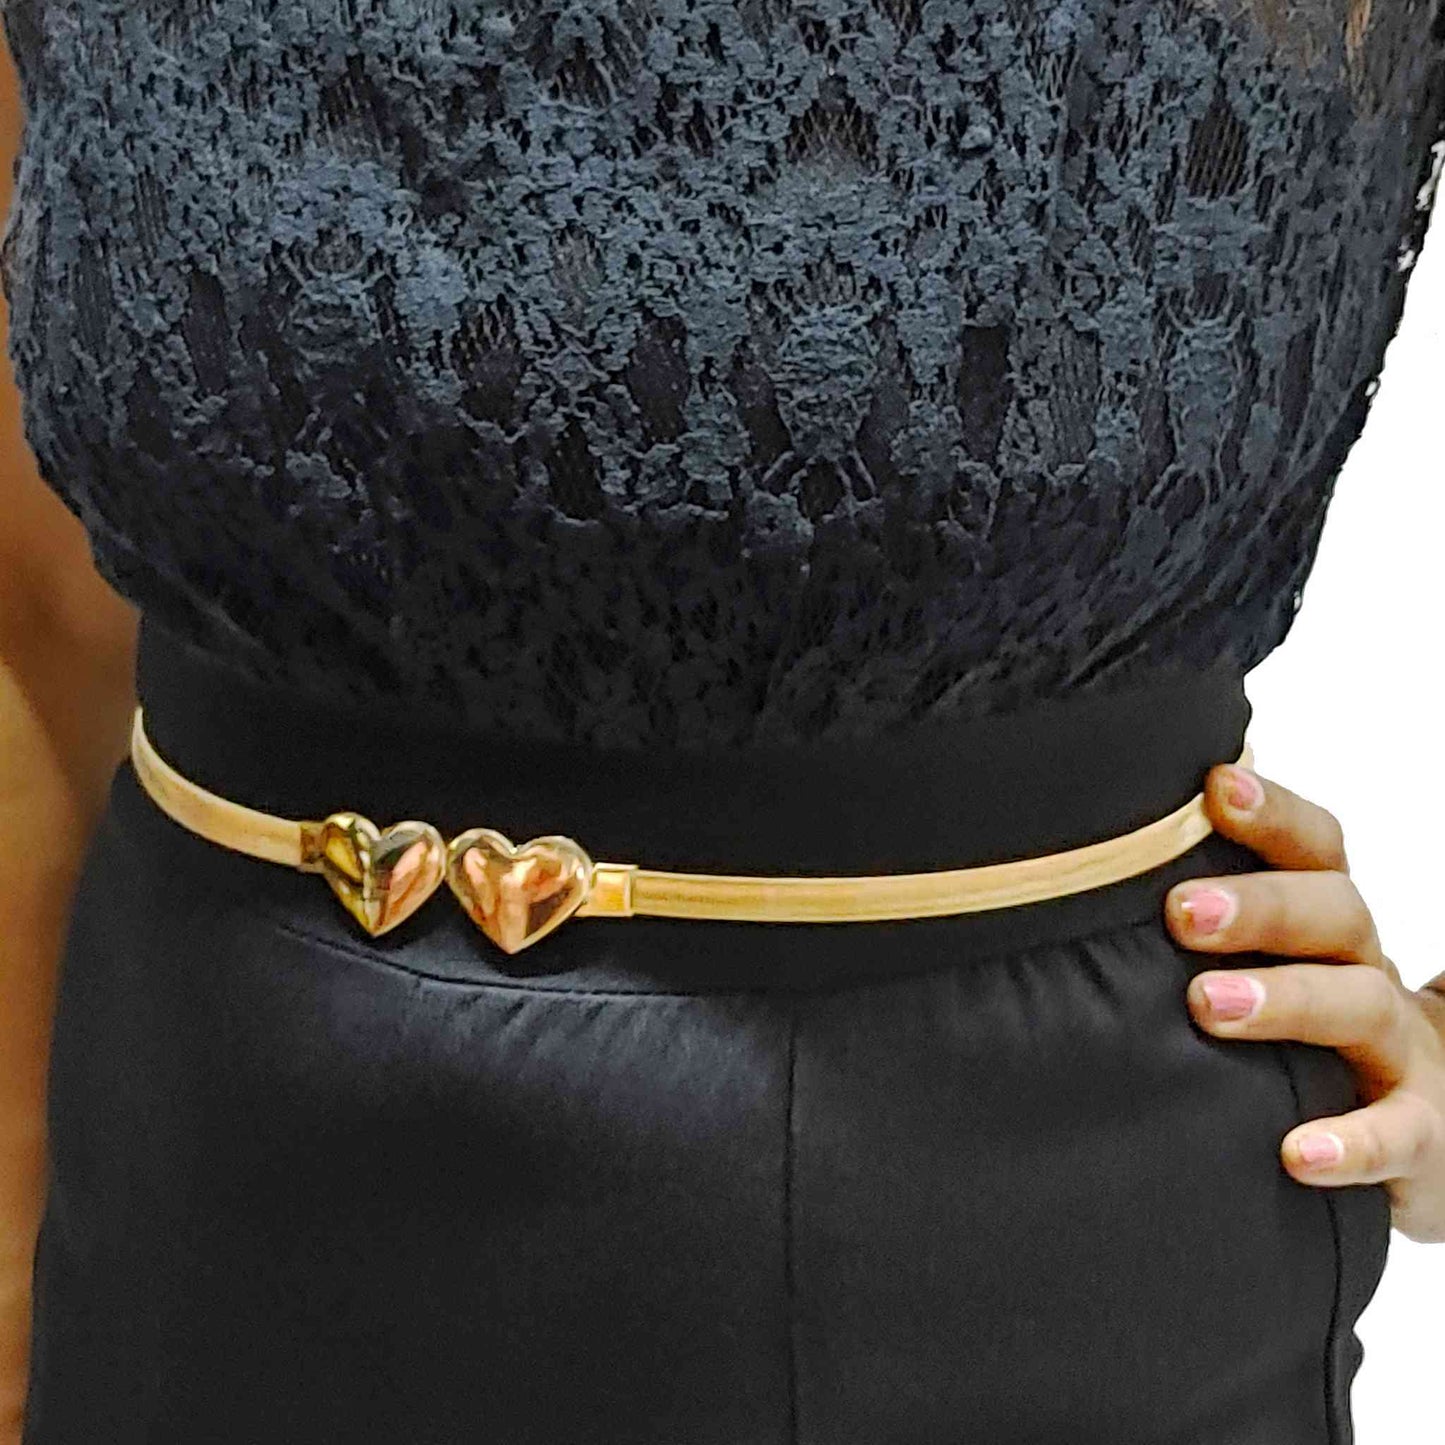 Indian Petals Stylish Fancy Metal Party Stretchable Spring Belt for Girls, Women, Gold